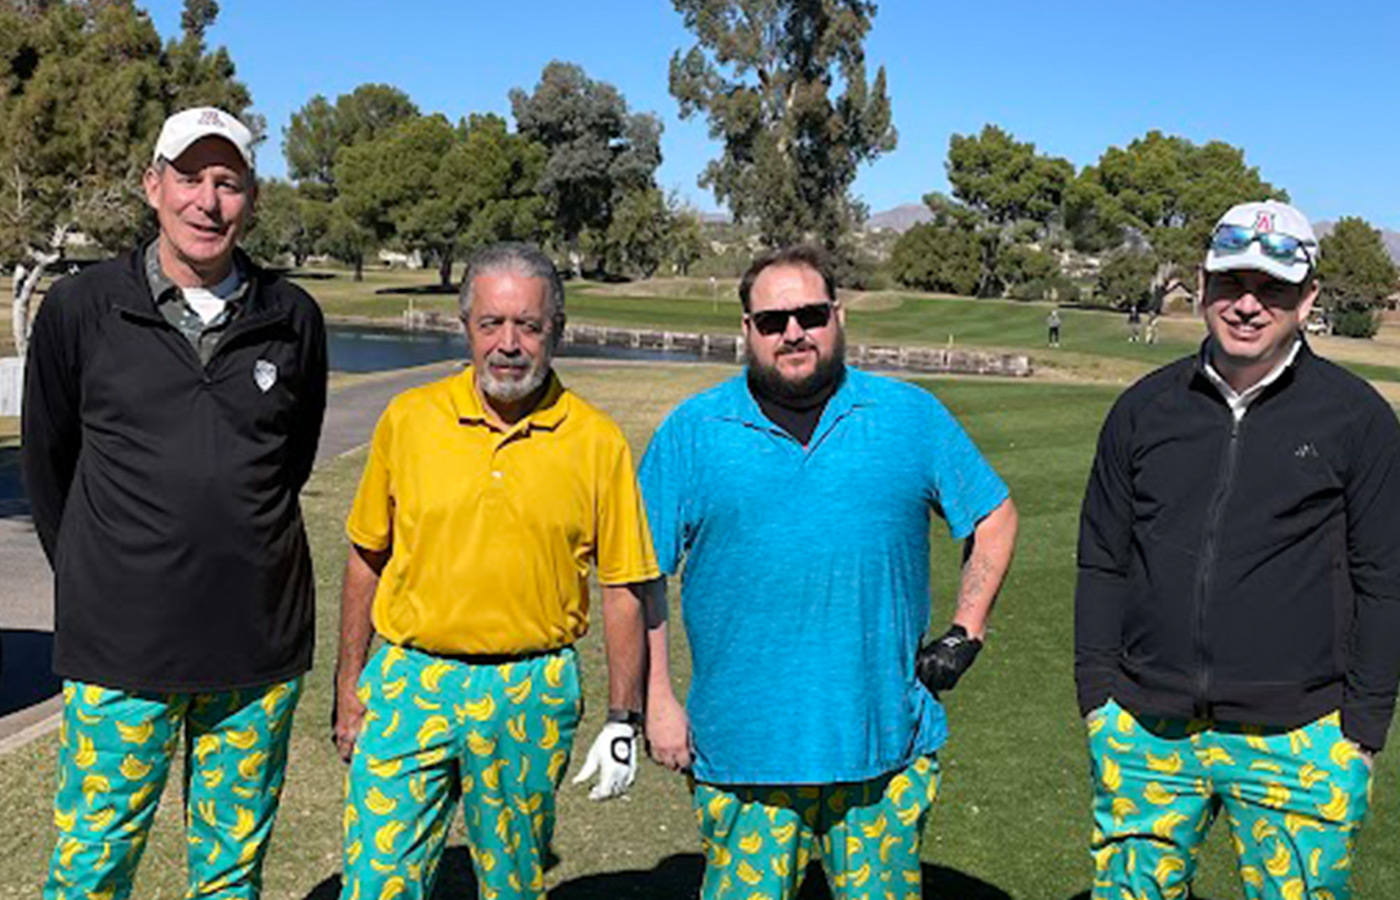 A group of people on the golf course with matching pants.